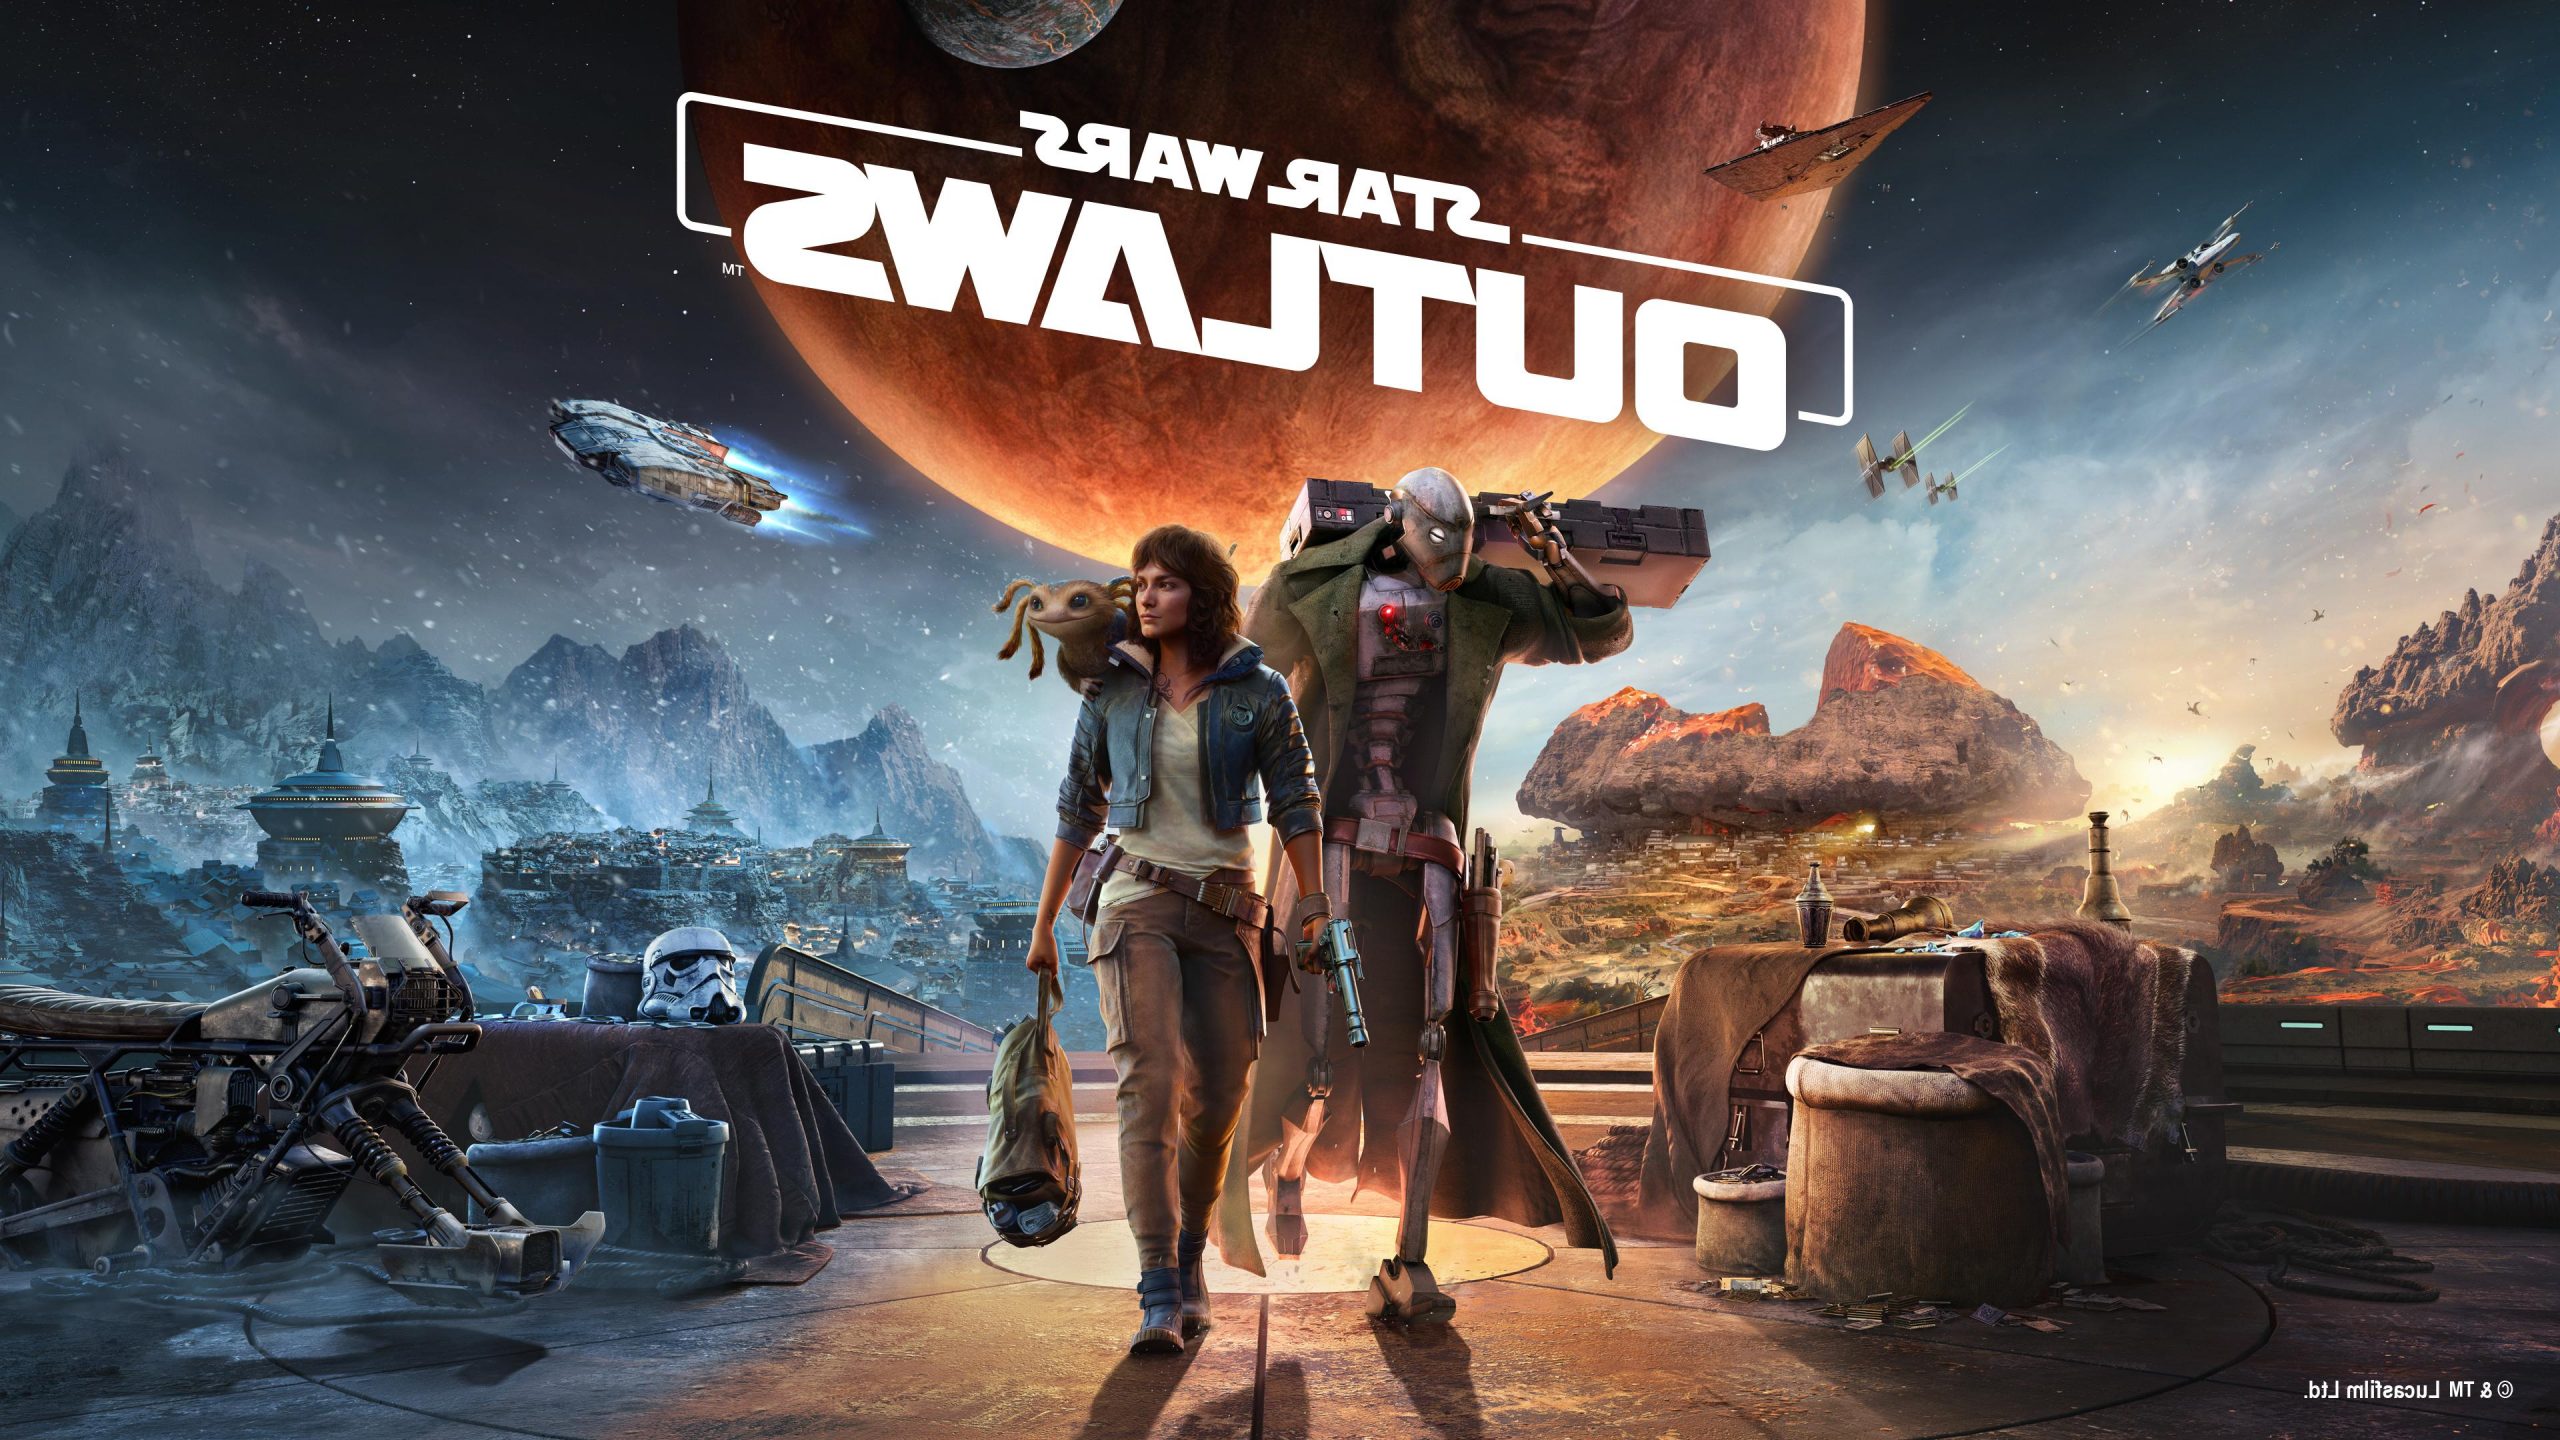 Star Wars Outlaws will see and talk about the authentic sci-fi simulator